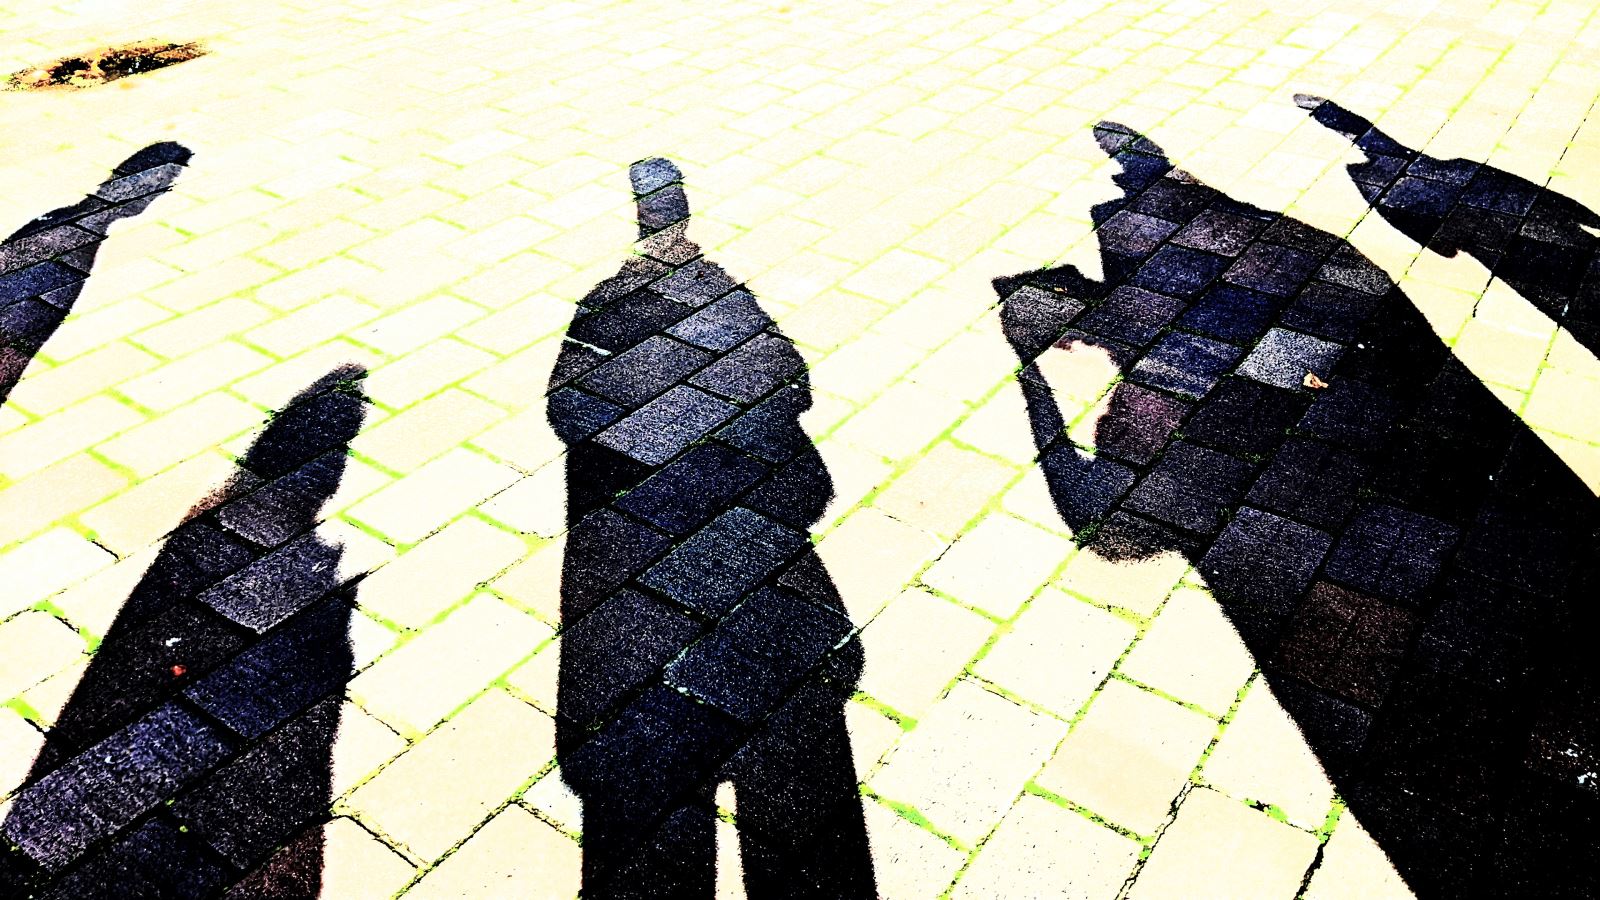 photo of a group of people's shadows